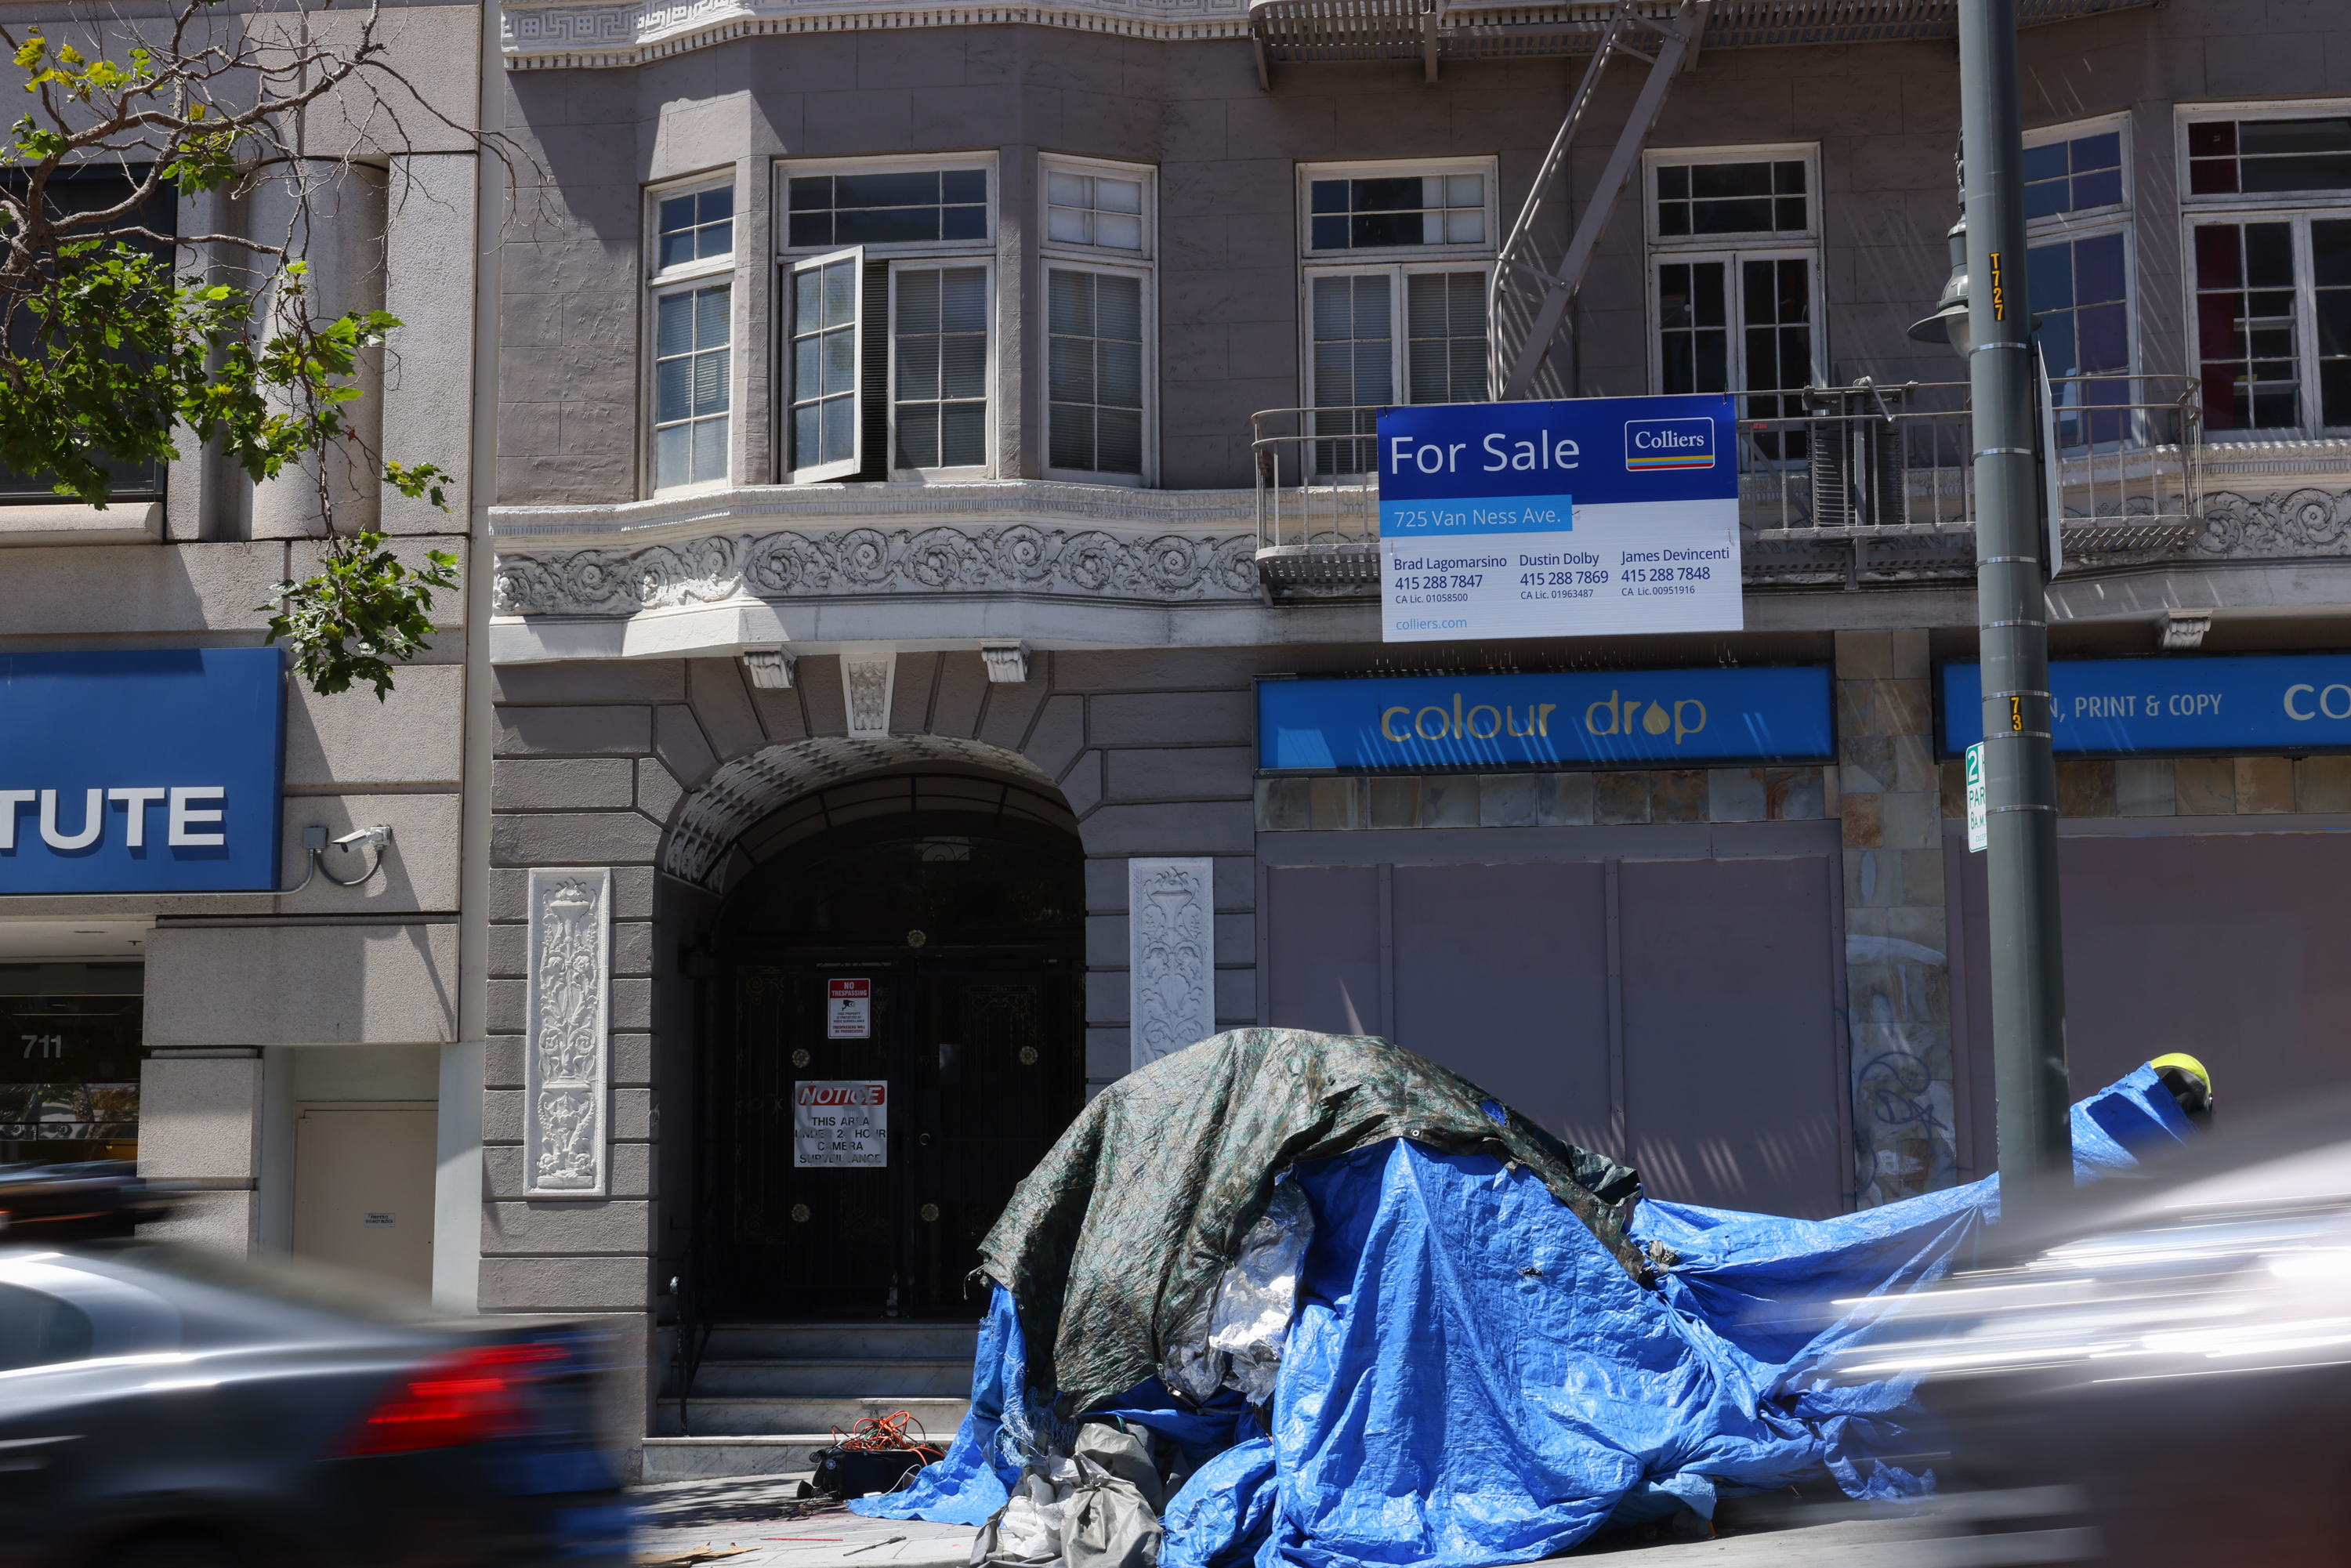 Tent in front of San Francisco building listed for sale.